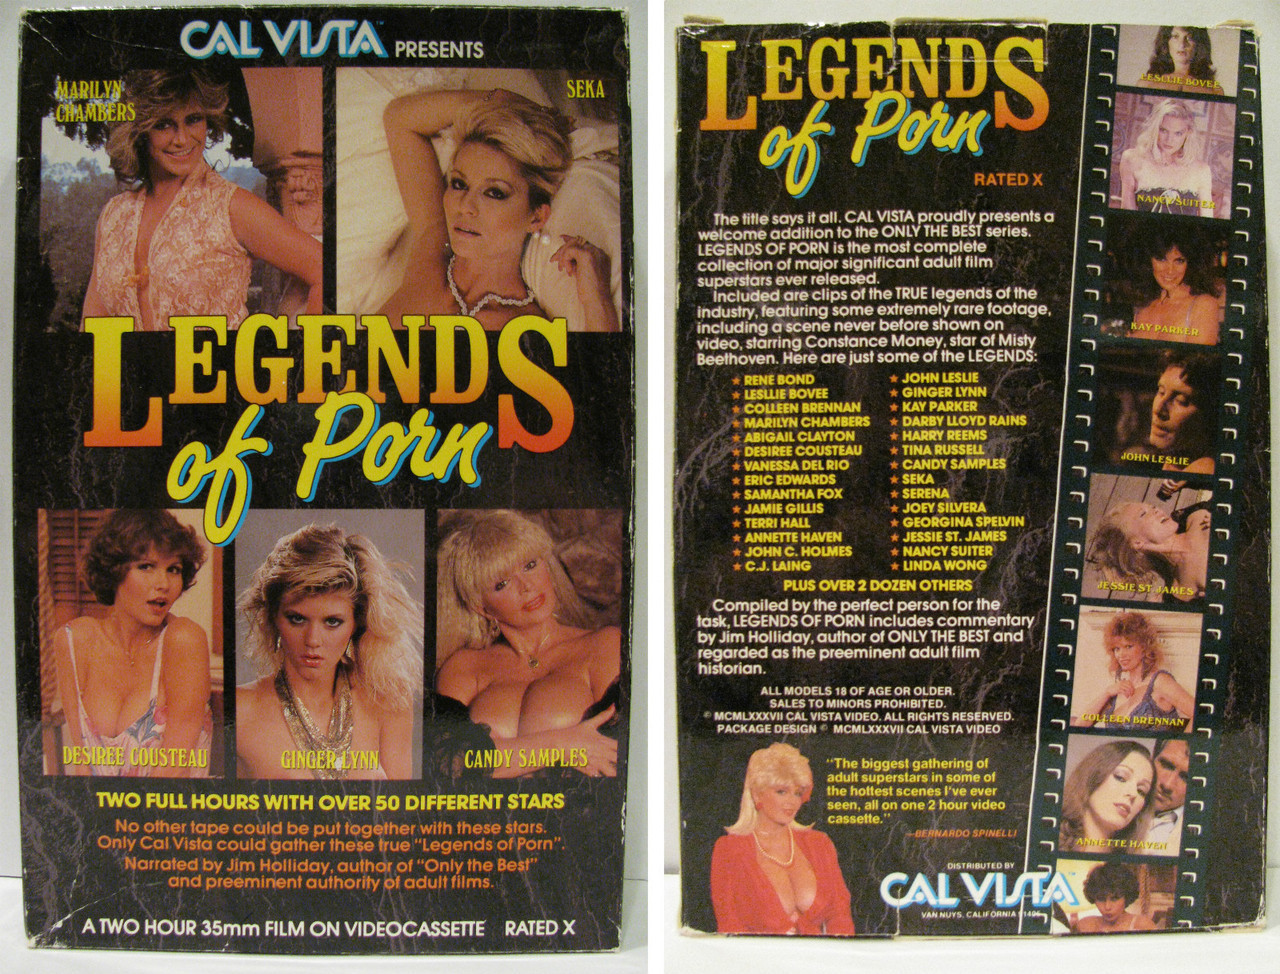 Legends of Porn, Cal Vista VHS, 1987 (Photo of Marilyn appears to be from a shoot